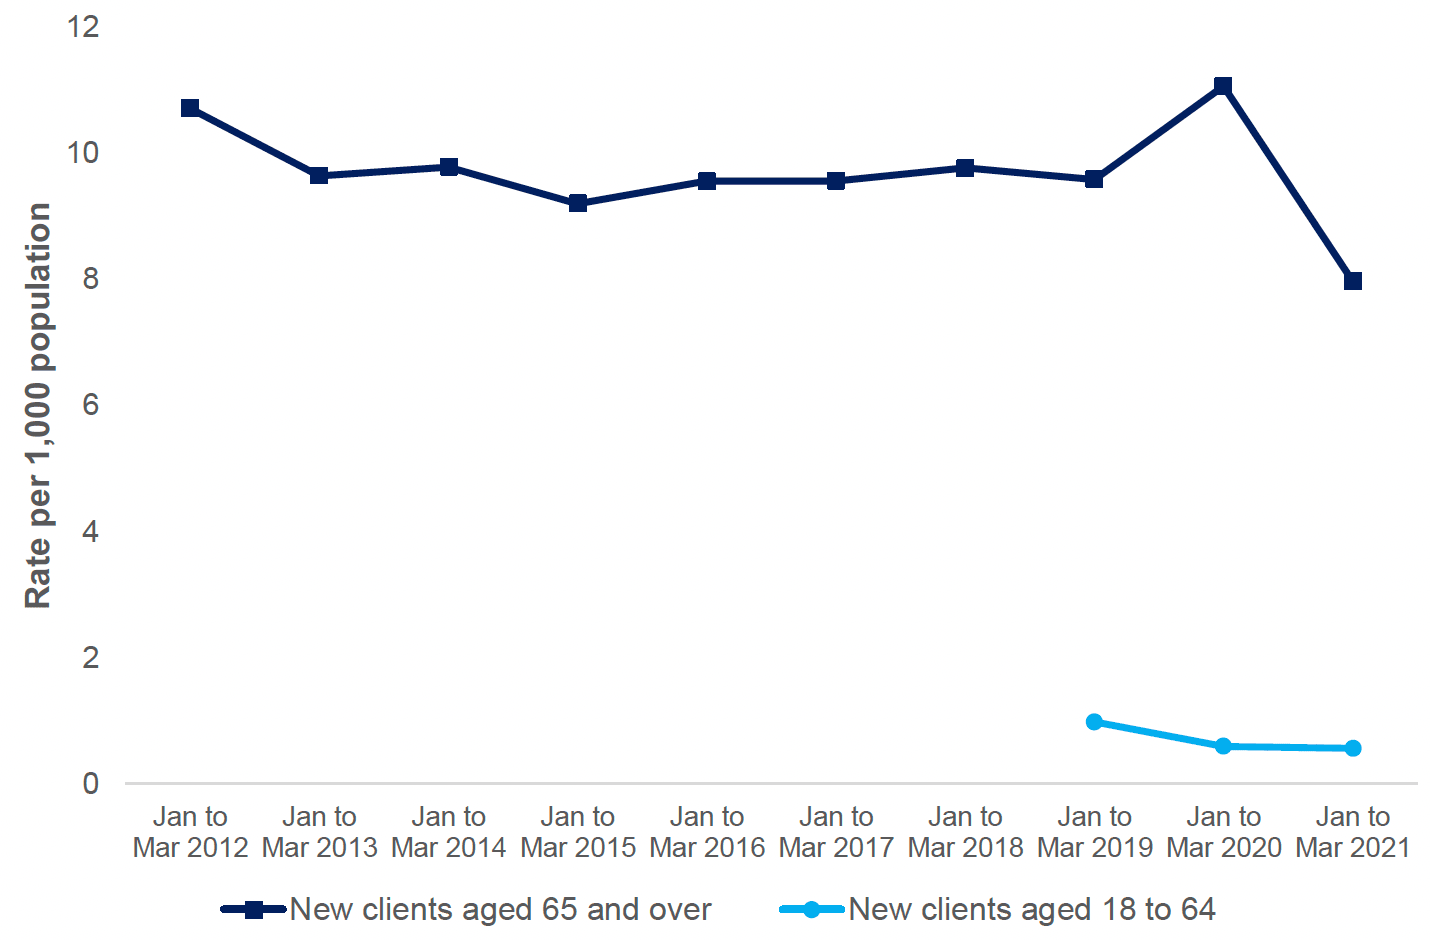 Line chart showing the rates, per 1,000 population, of community care assessments for new clients split by age: 65 and over and 18 to 64, in local authorities that responded every year. Rates for new older clients are stable between 2013 and 2019, rise to 11 in 2020 and then decline to 8 in 2021. The rate for younger adults was considerably lower than for older people. The rate remained relatively stable over the three years.